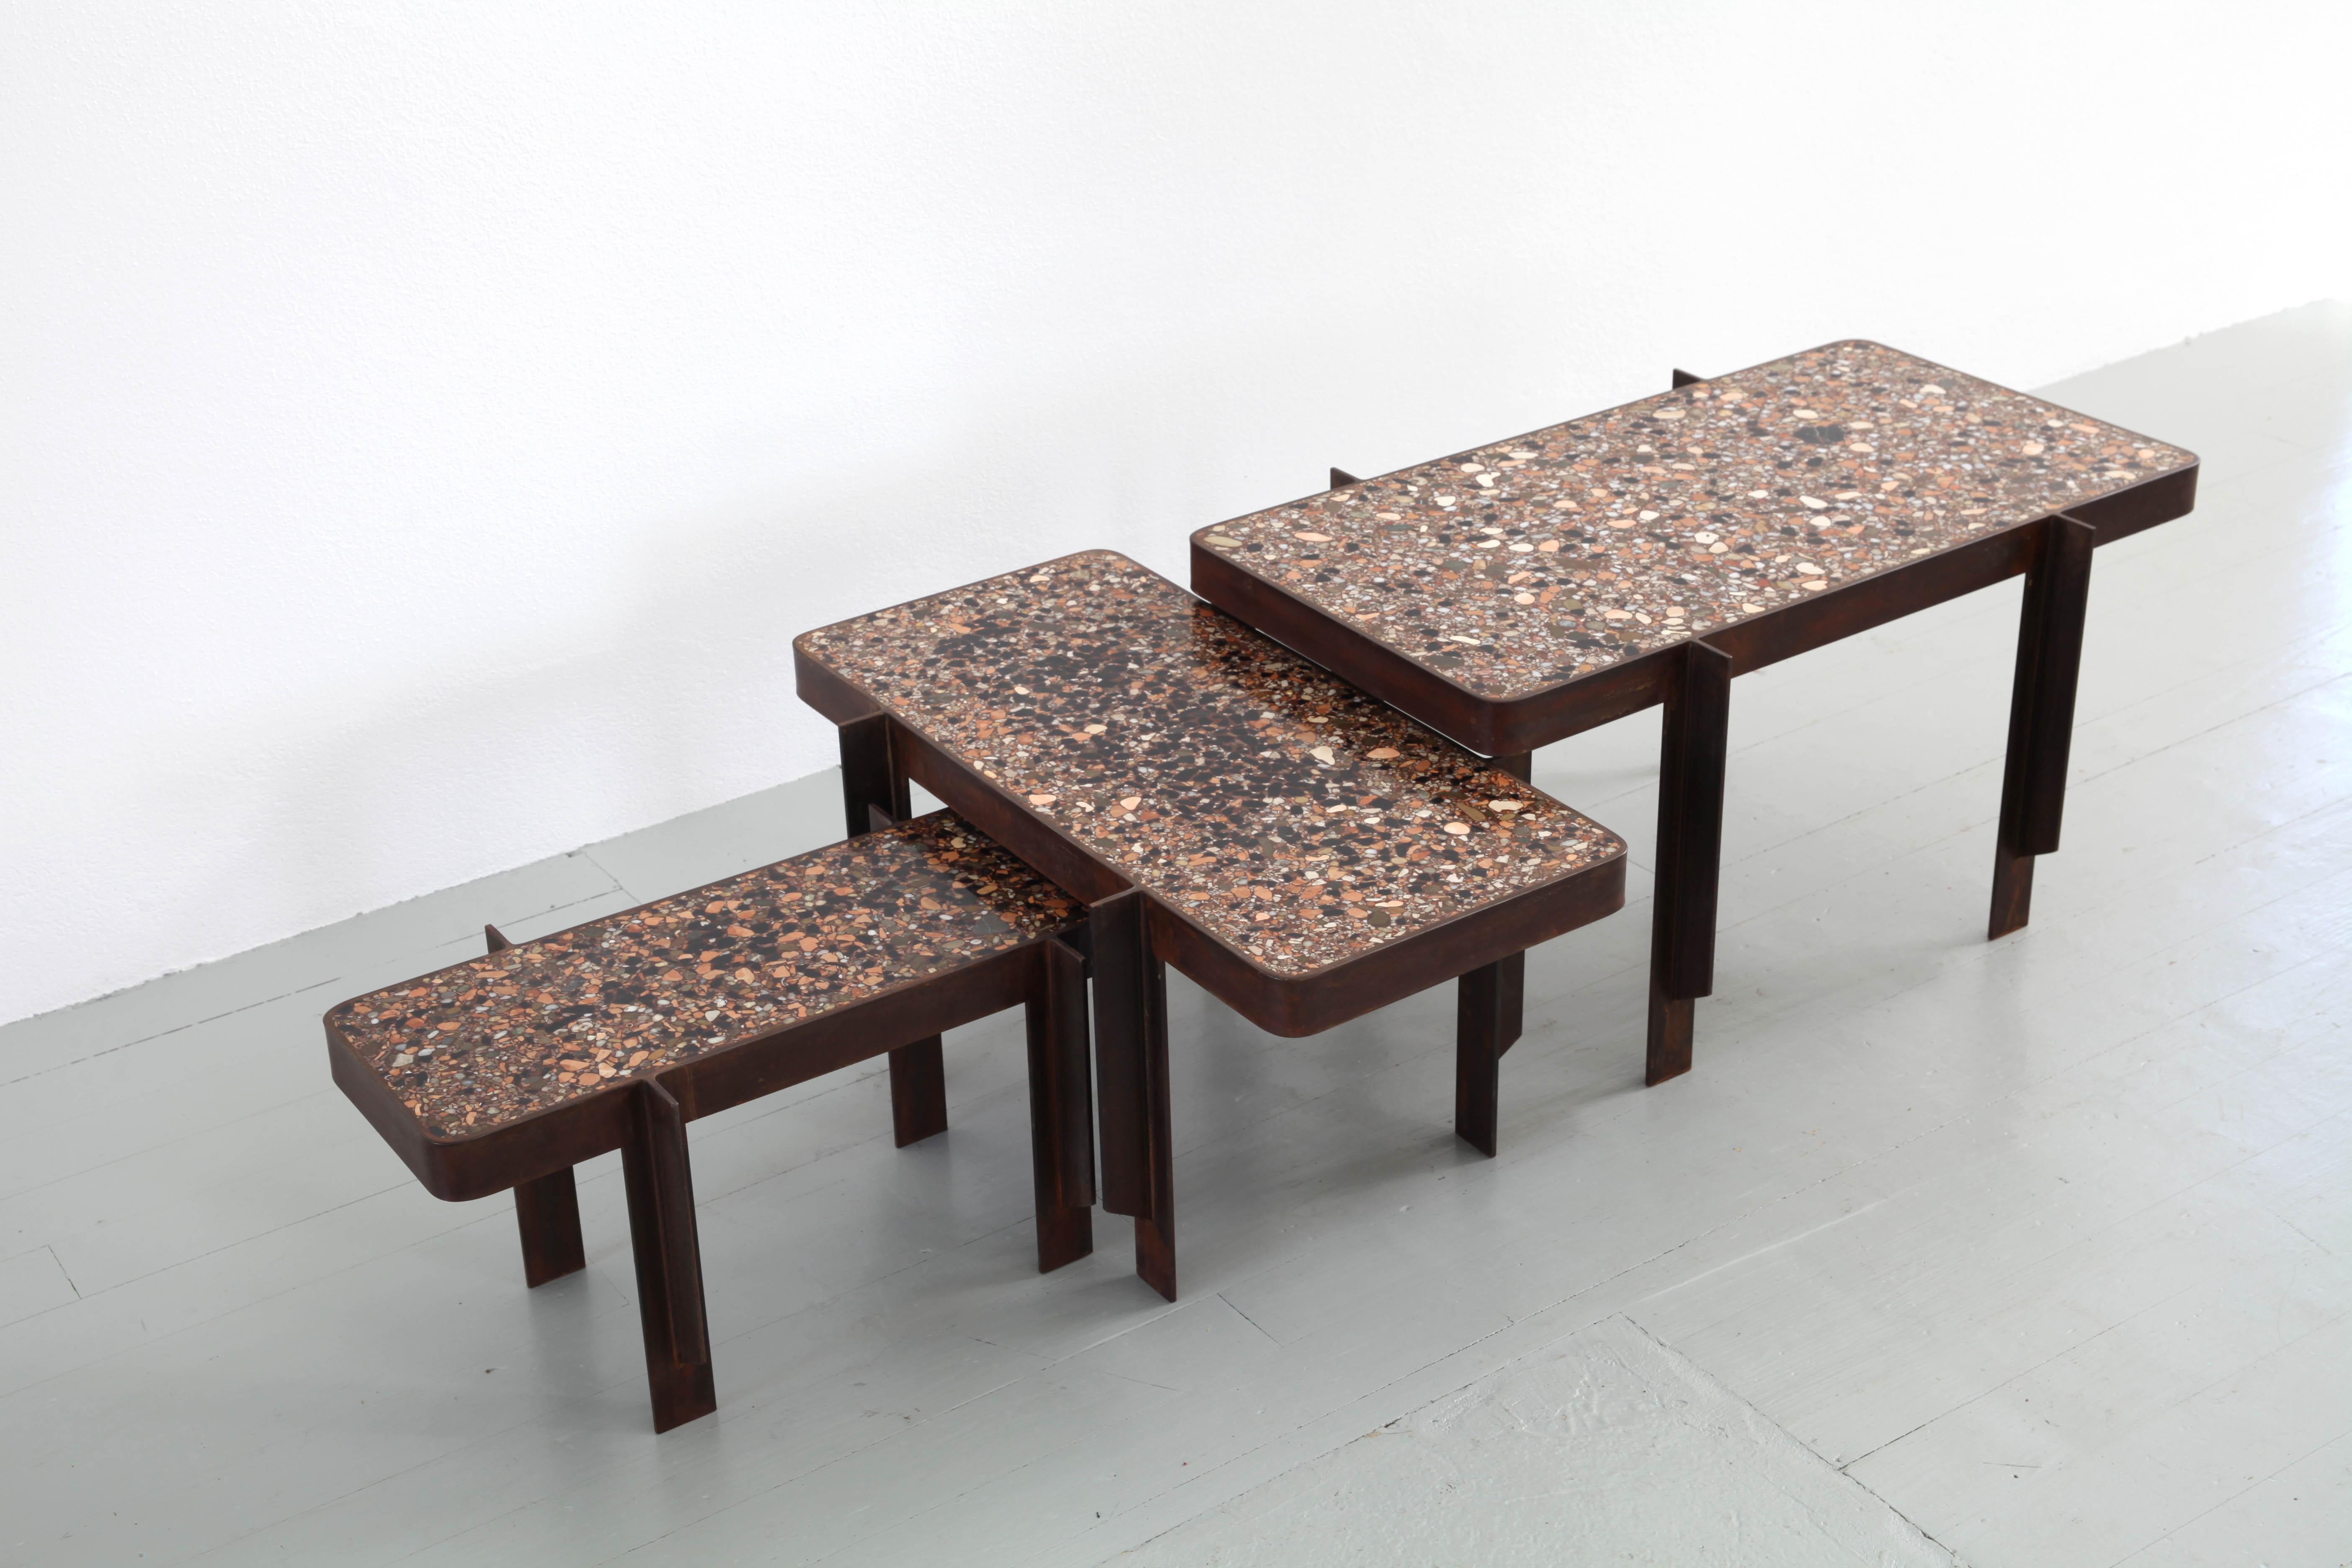 Felix Muhrhofer Contemporary Terrazzo Table with Corroded Steel Construction 2